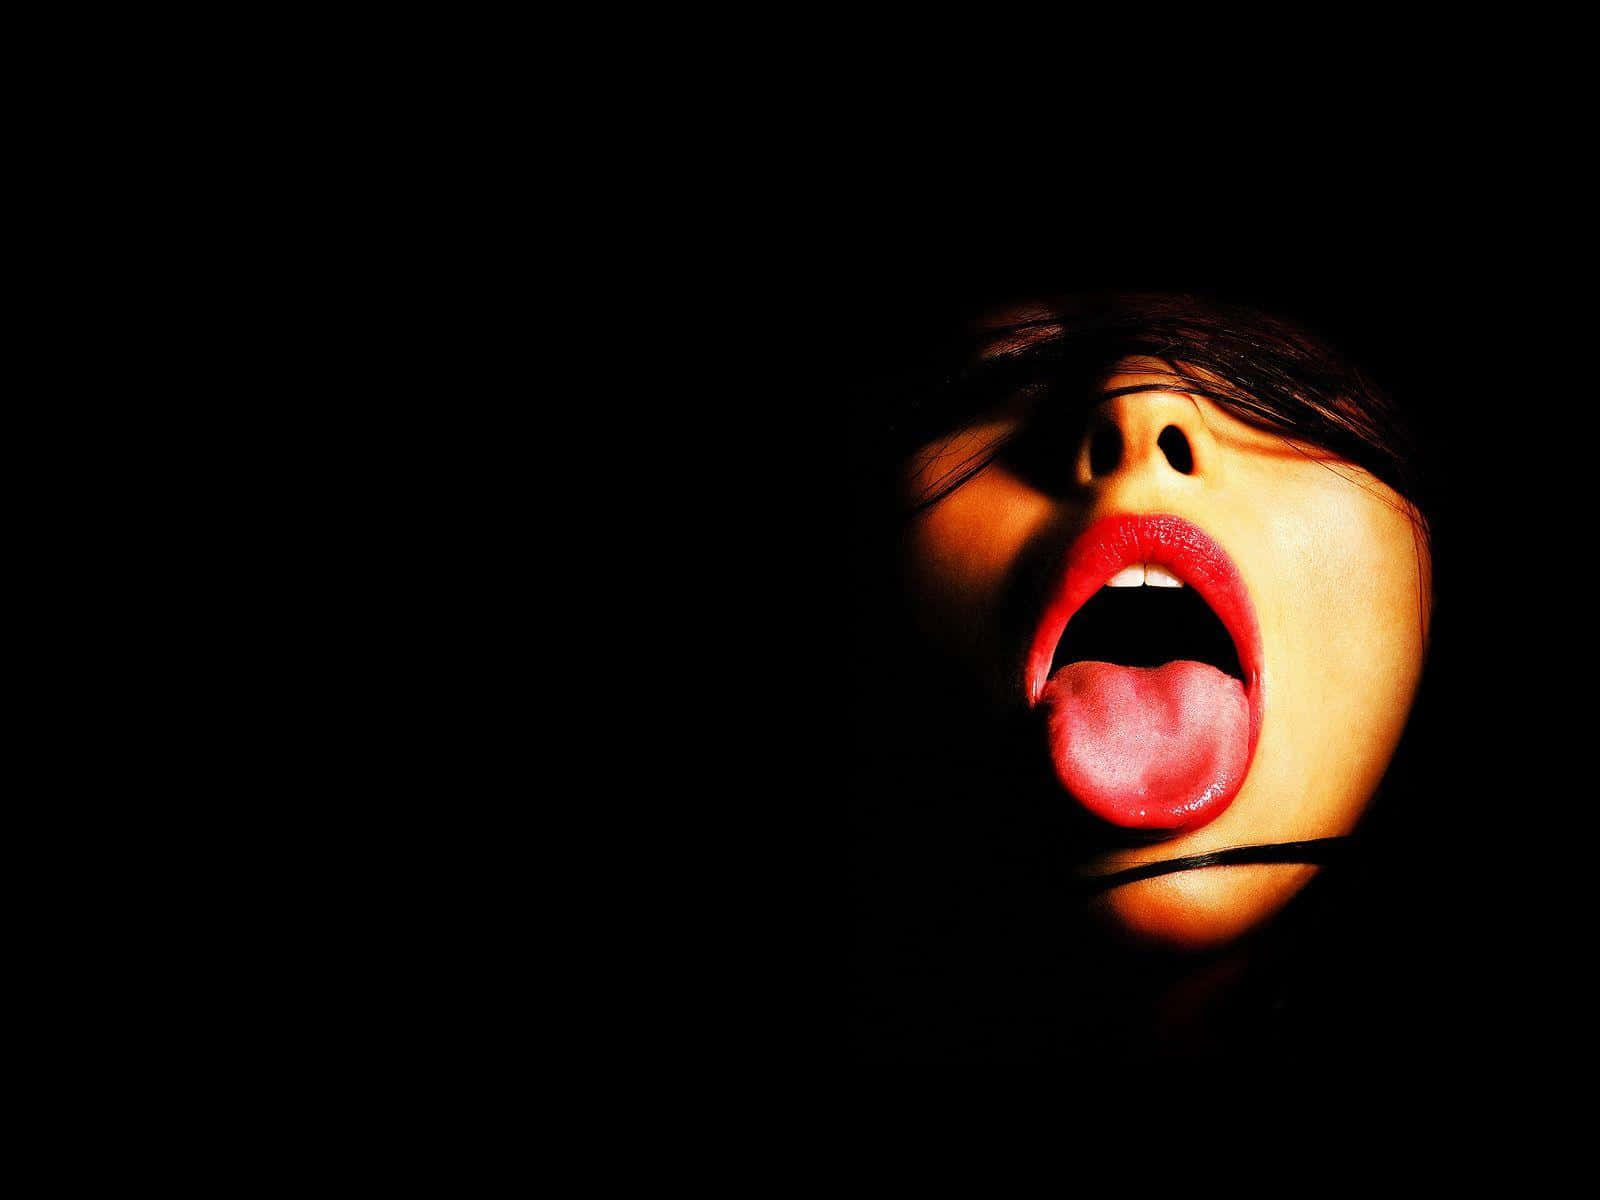 Lick It Tongue Out Cover Photo